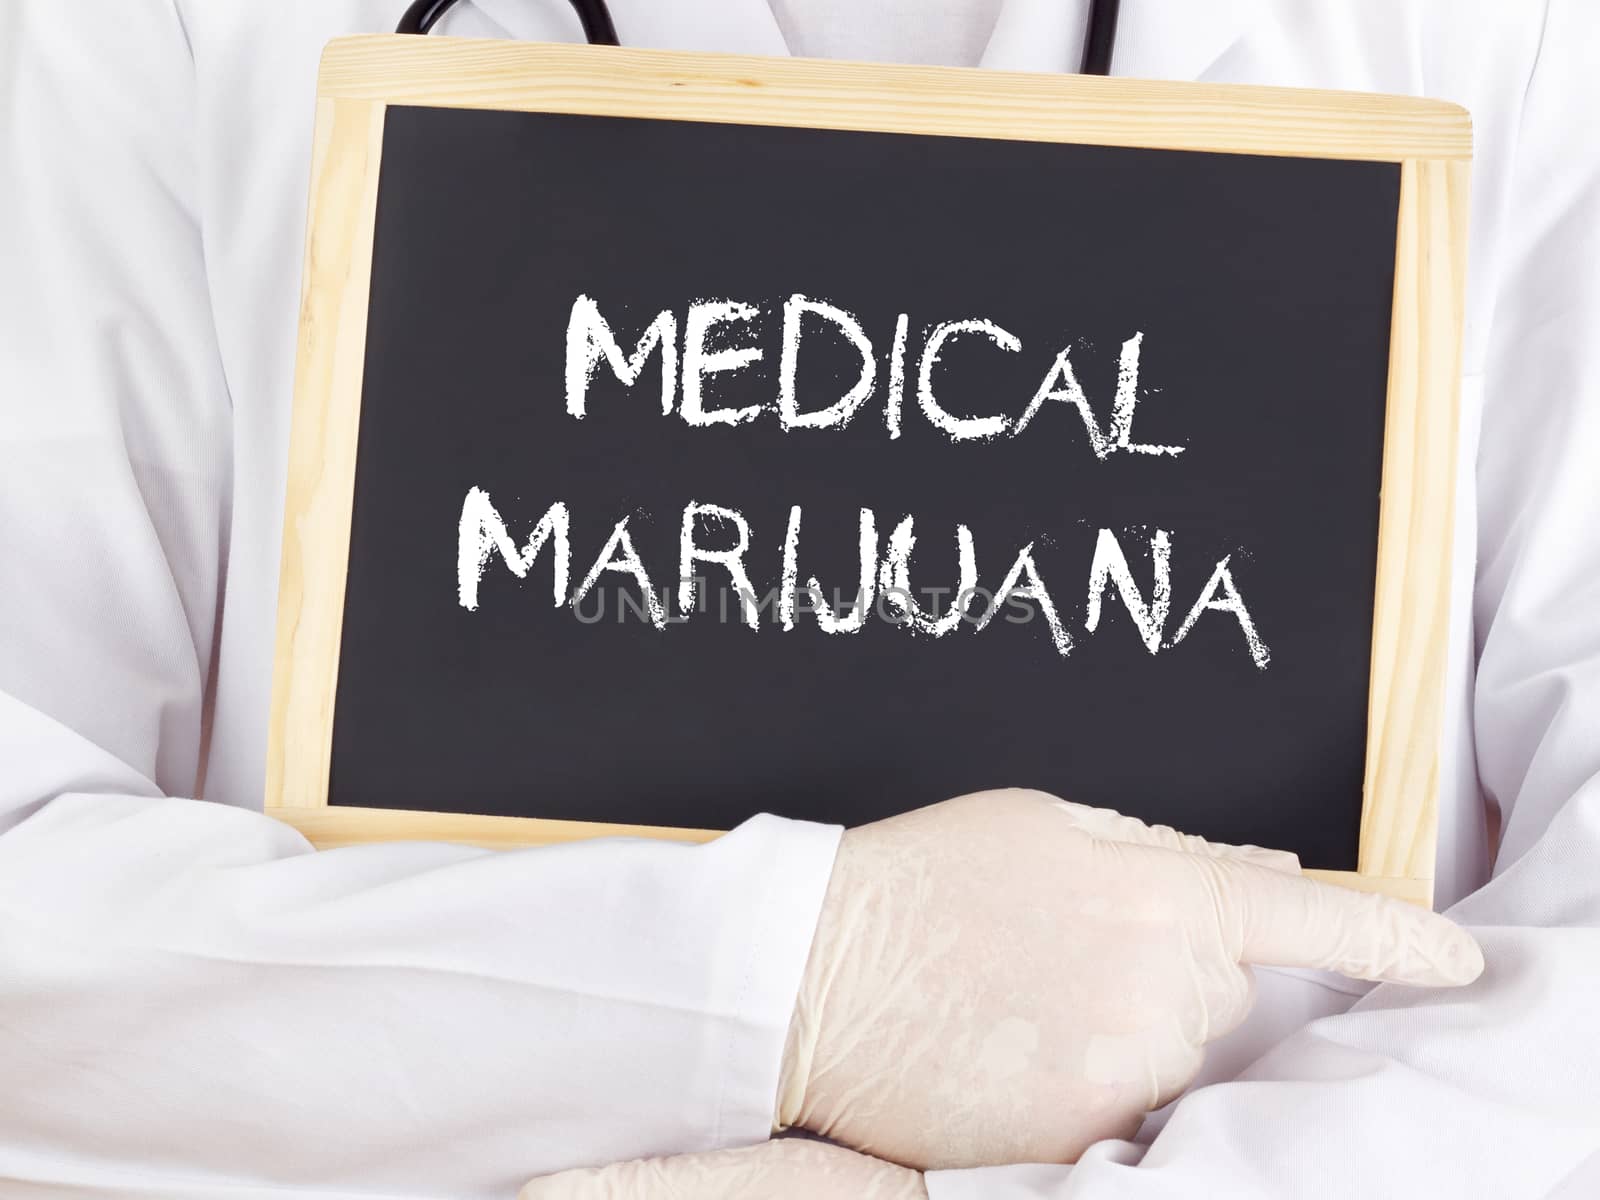 Doctor shows information on blackboard: medical marijuana by gwolters